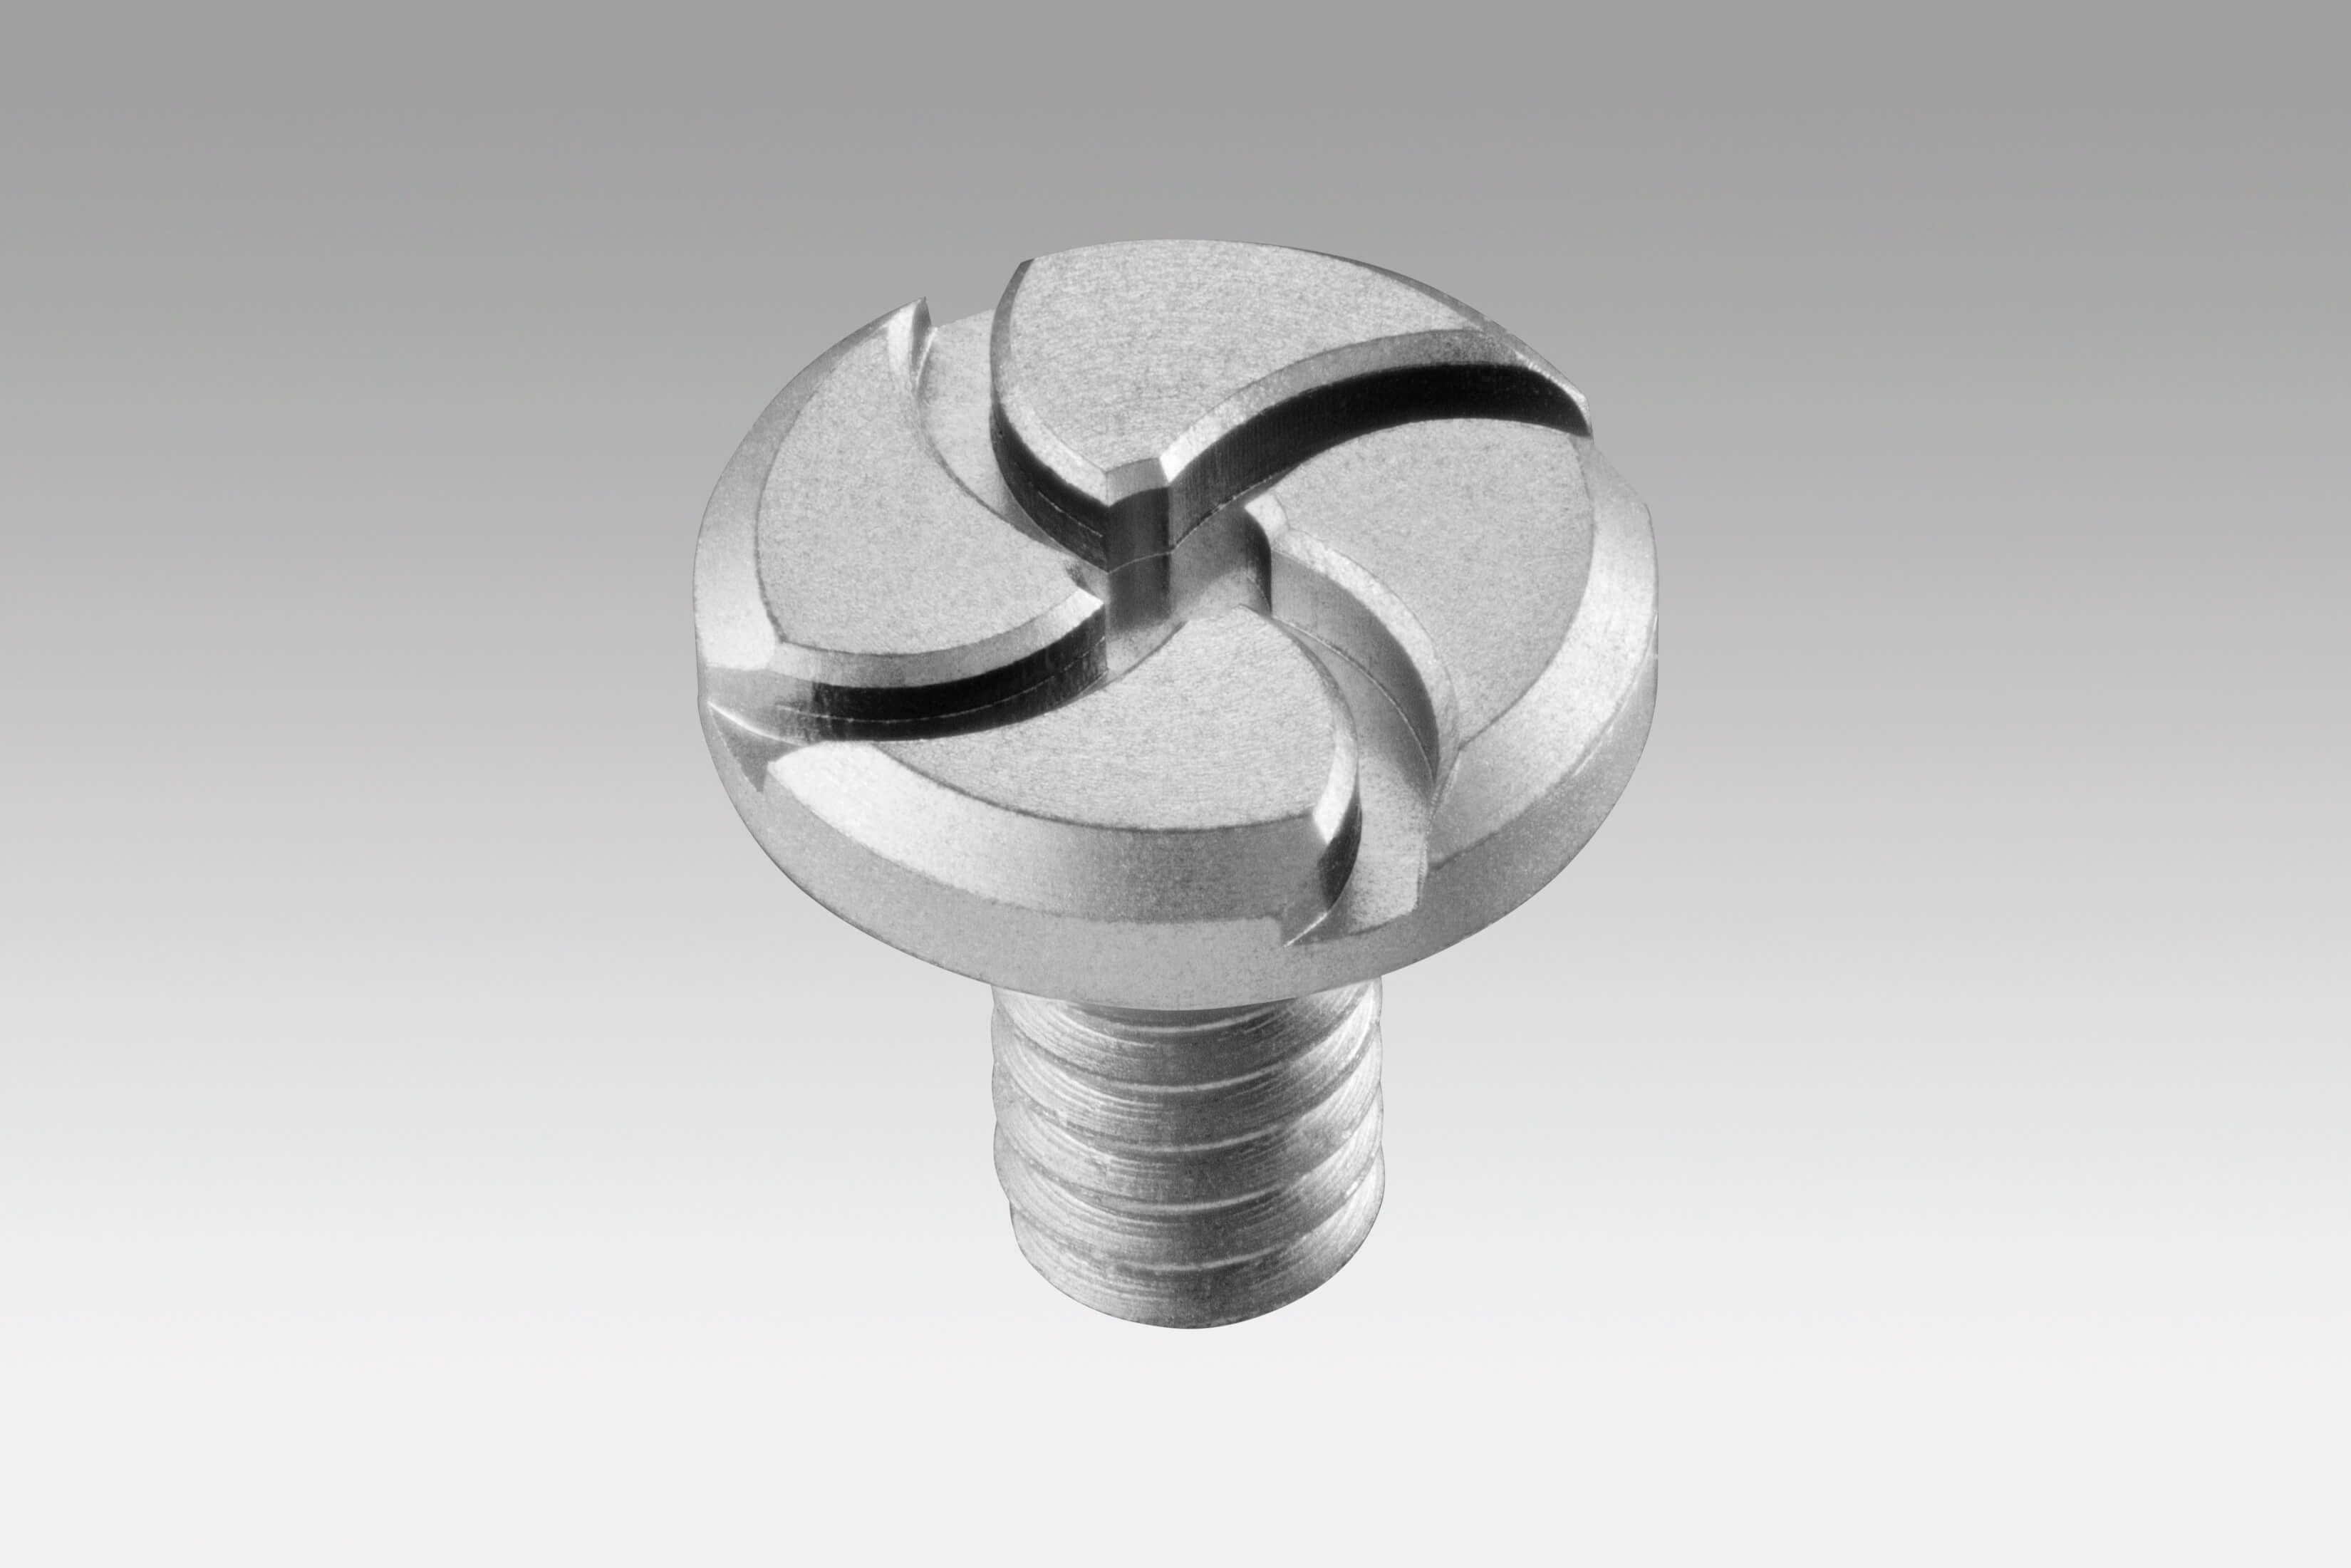 : Case back screw - Swiss supplier and manufacturer of micro-parts for watchmaking